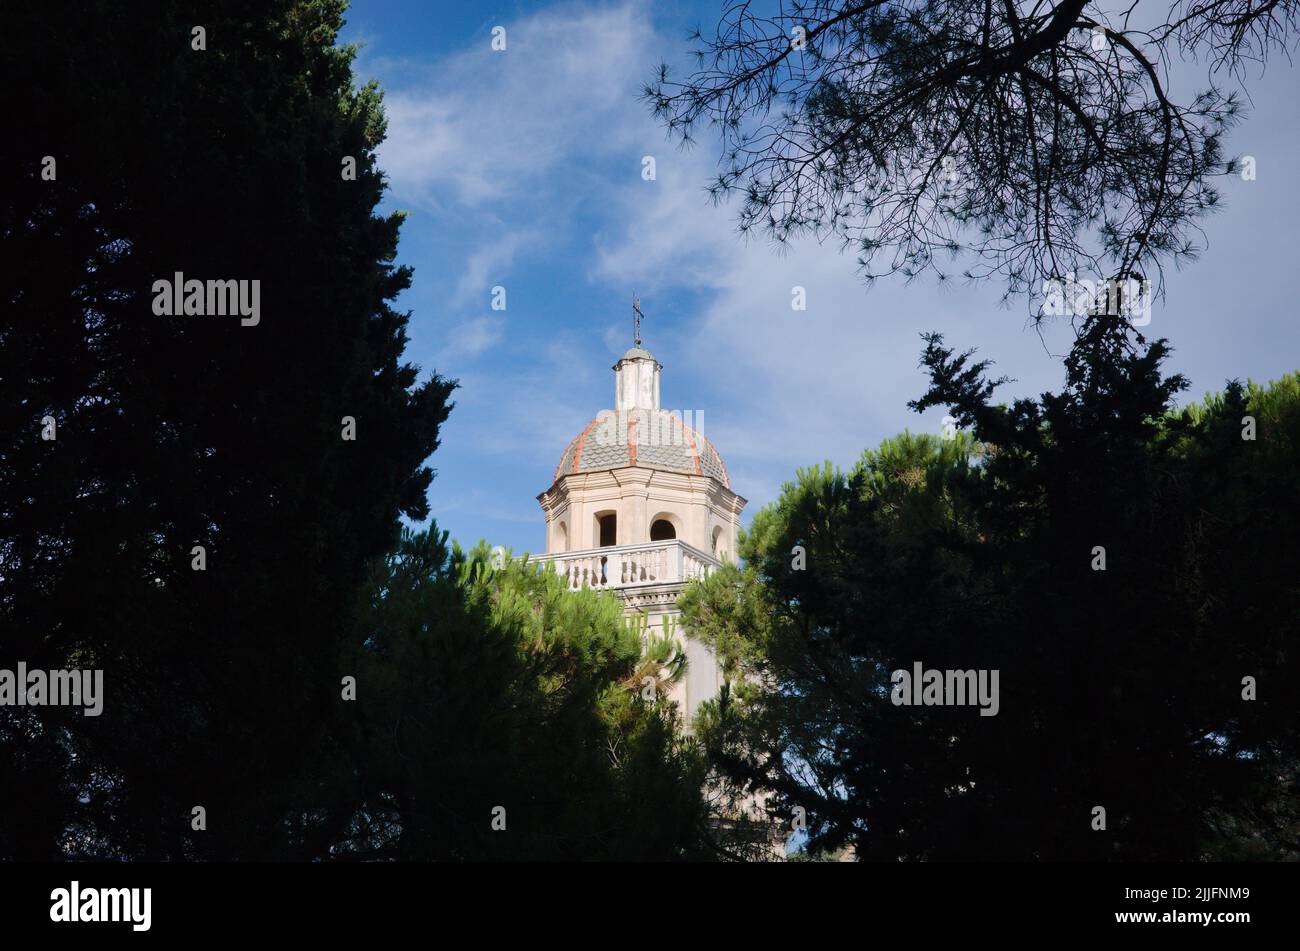 View of dome of San Lorenzo church surrounded by tree branches against blue sky, Porto Venere, Italy. Dome of catholic church in Roman style Stock Photo